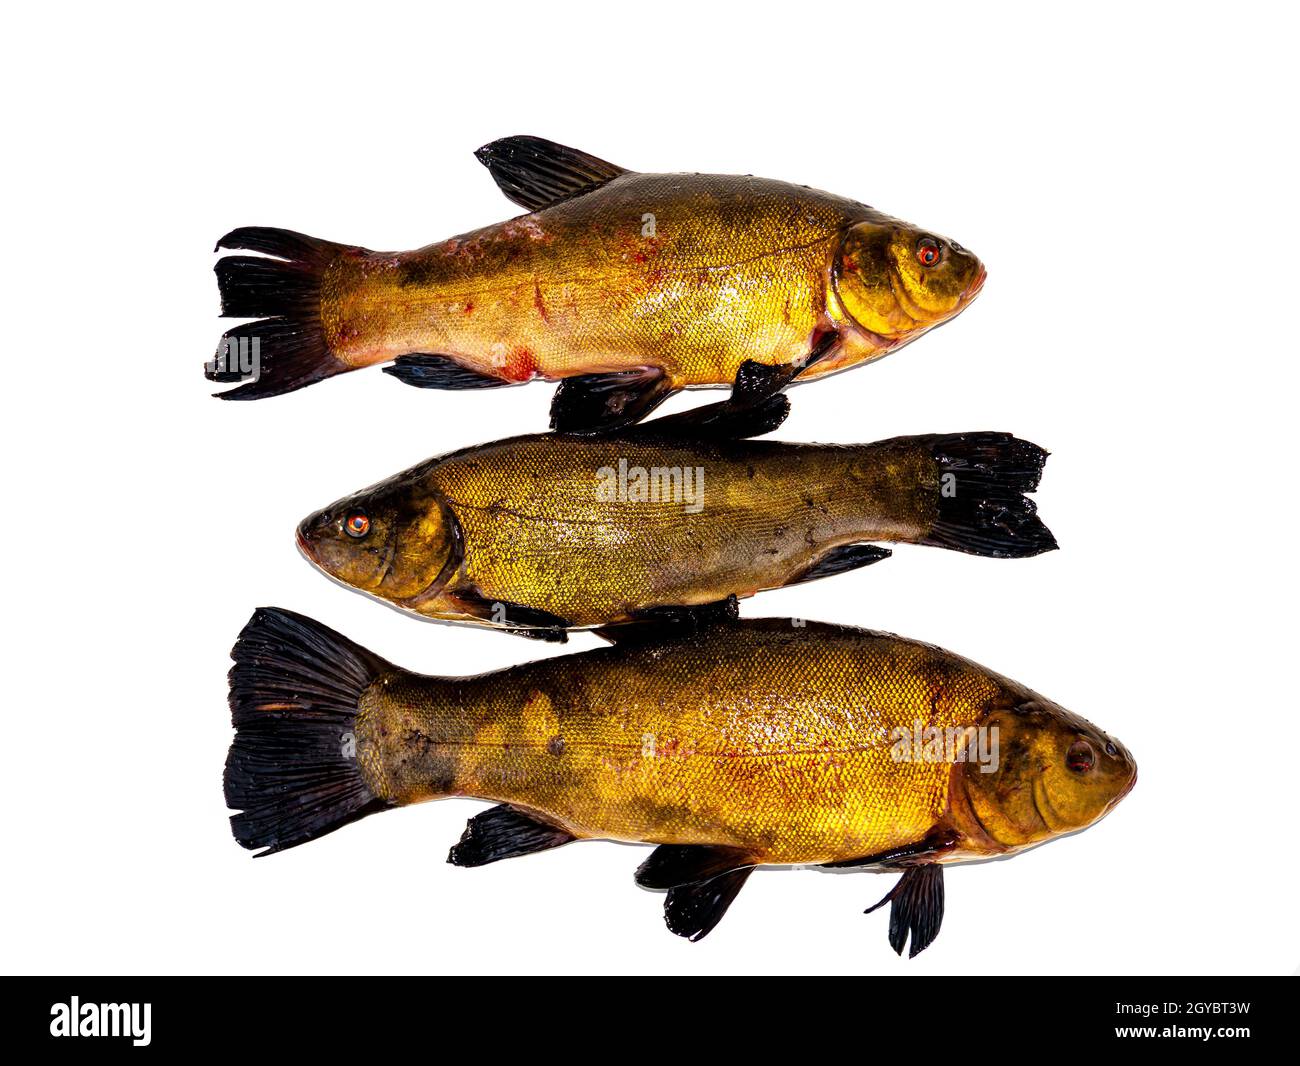 Freshwater fish tench on a white background. Fish tench. Freshwater fishing. Fishing catch. Underwater animals of lakes and rivers. Cooking food. Fins Stock Photo